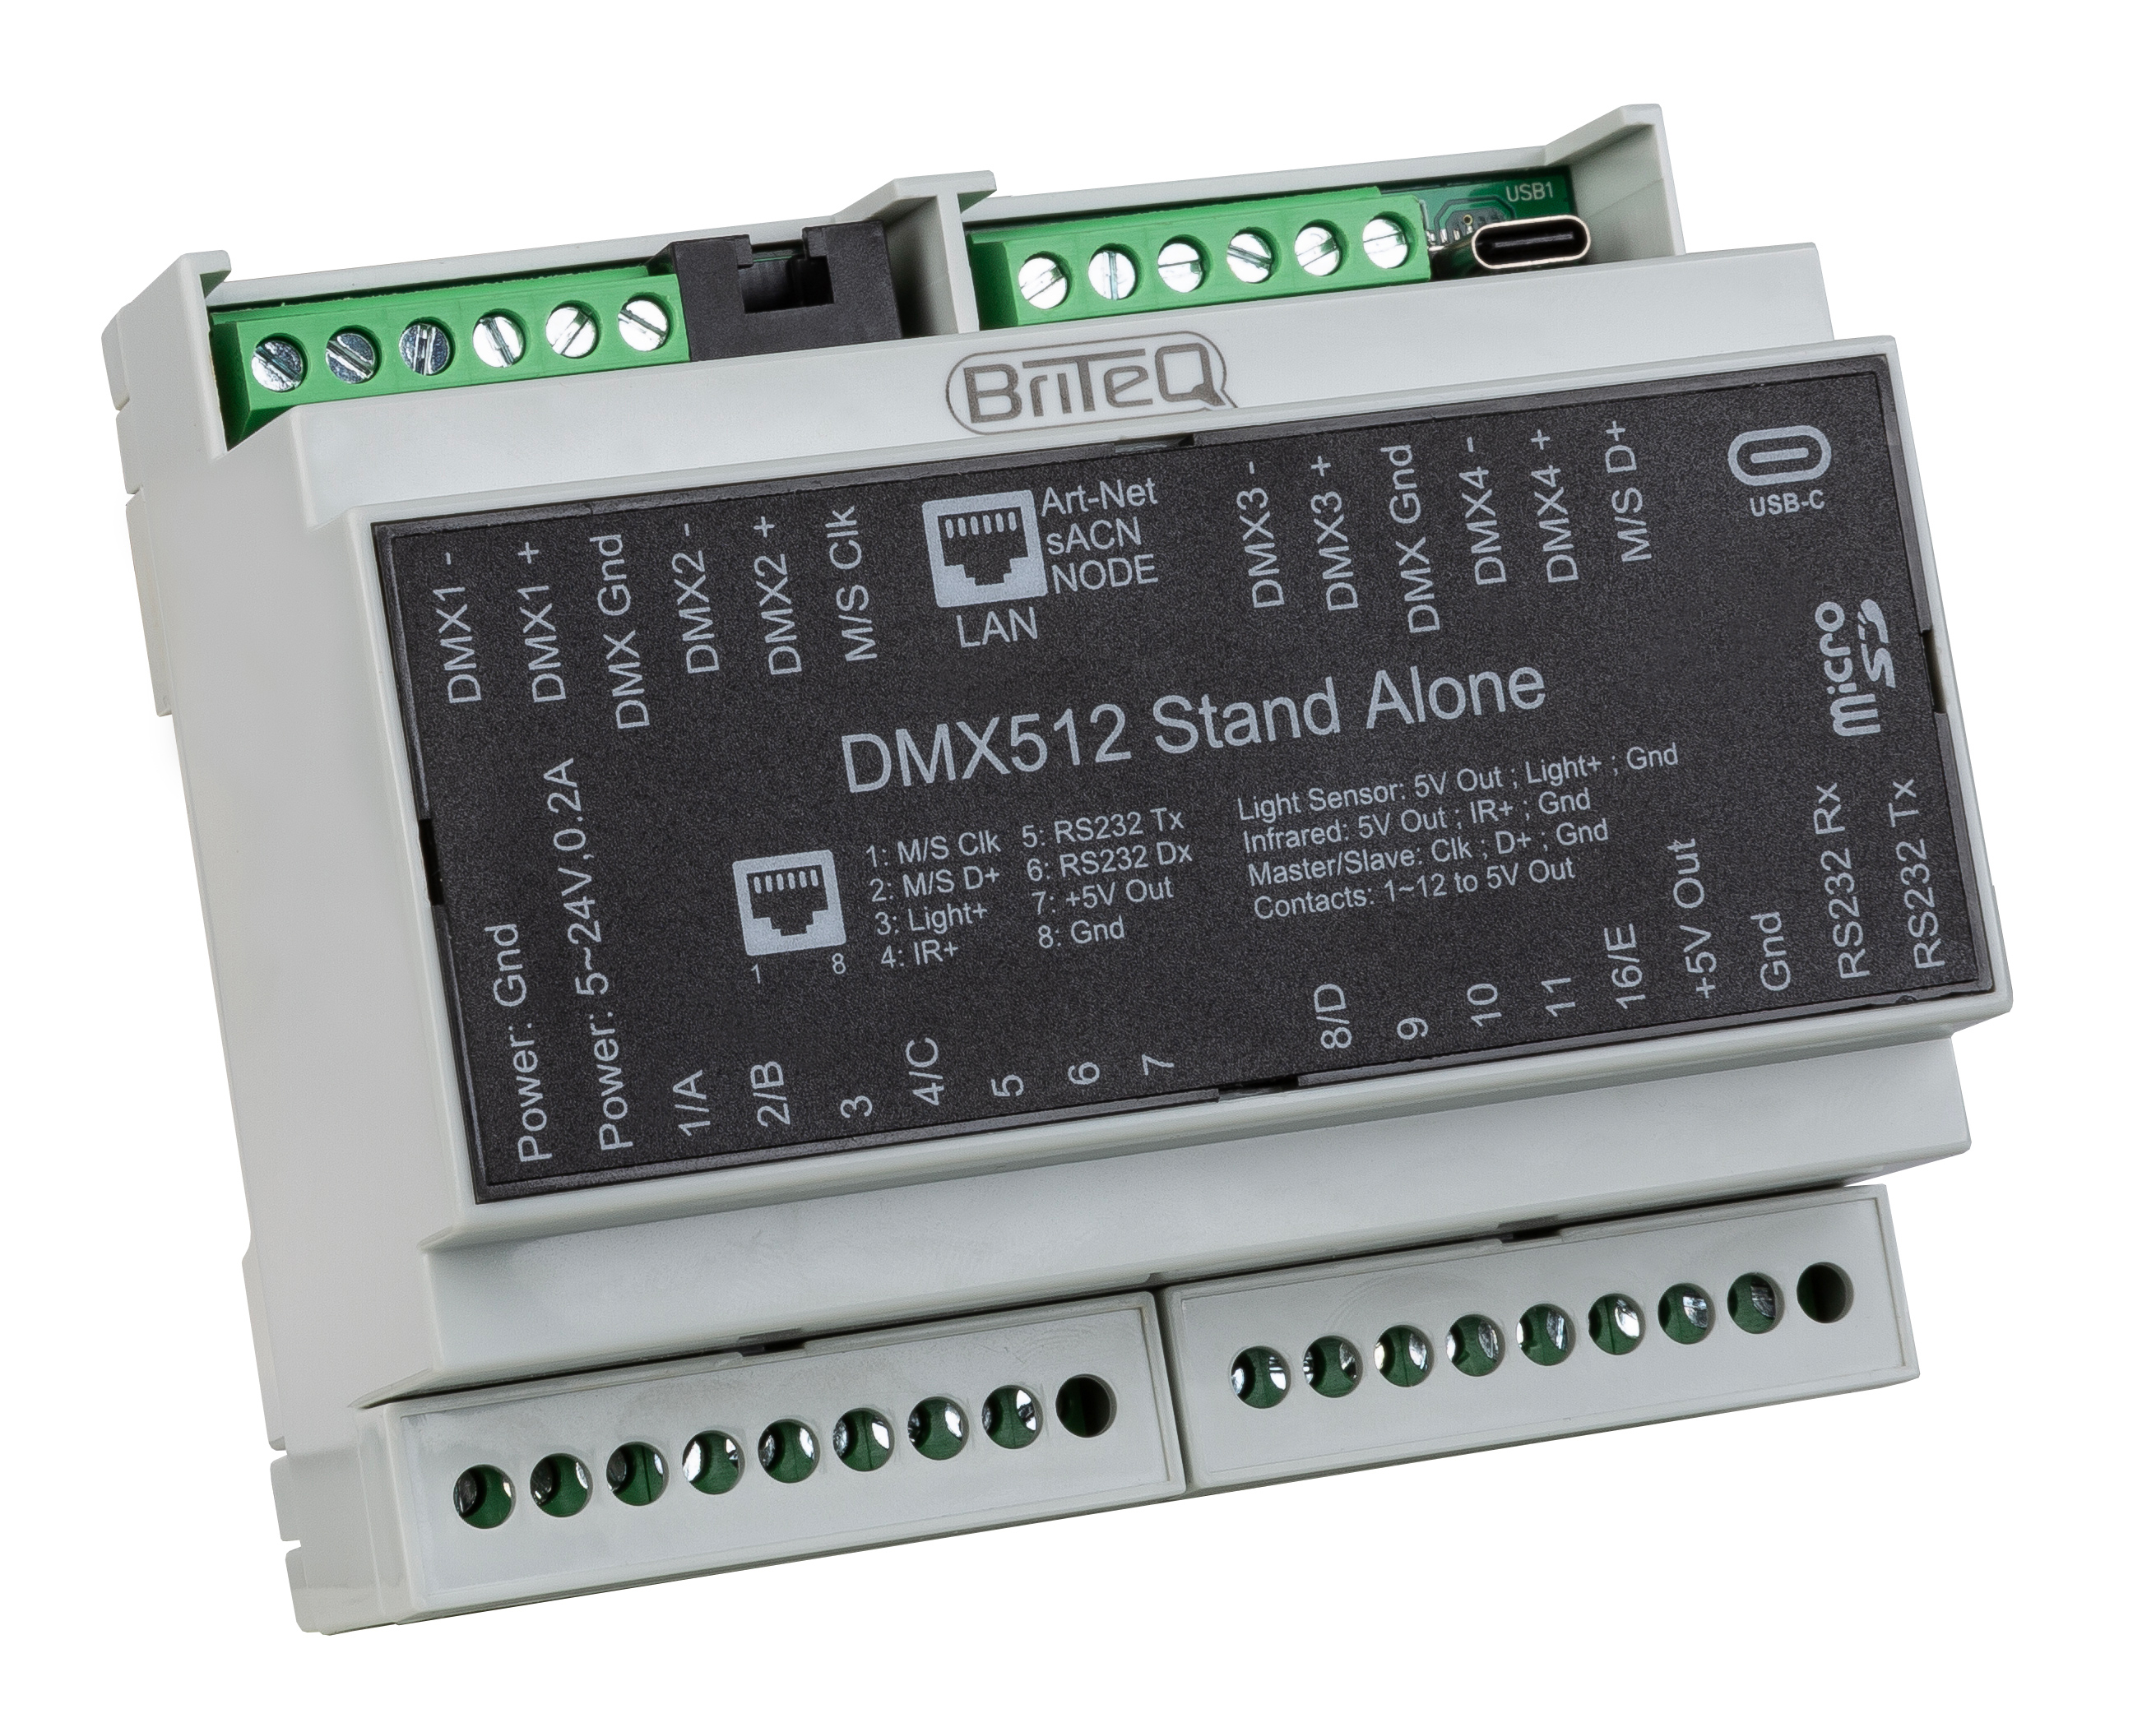 1024 Channel DMX interface & Multizone controller with Ethernet port for Local Area Network (LAN, WLAN) that can be easily mounted on a DIN Rail